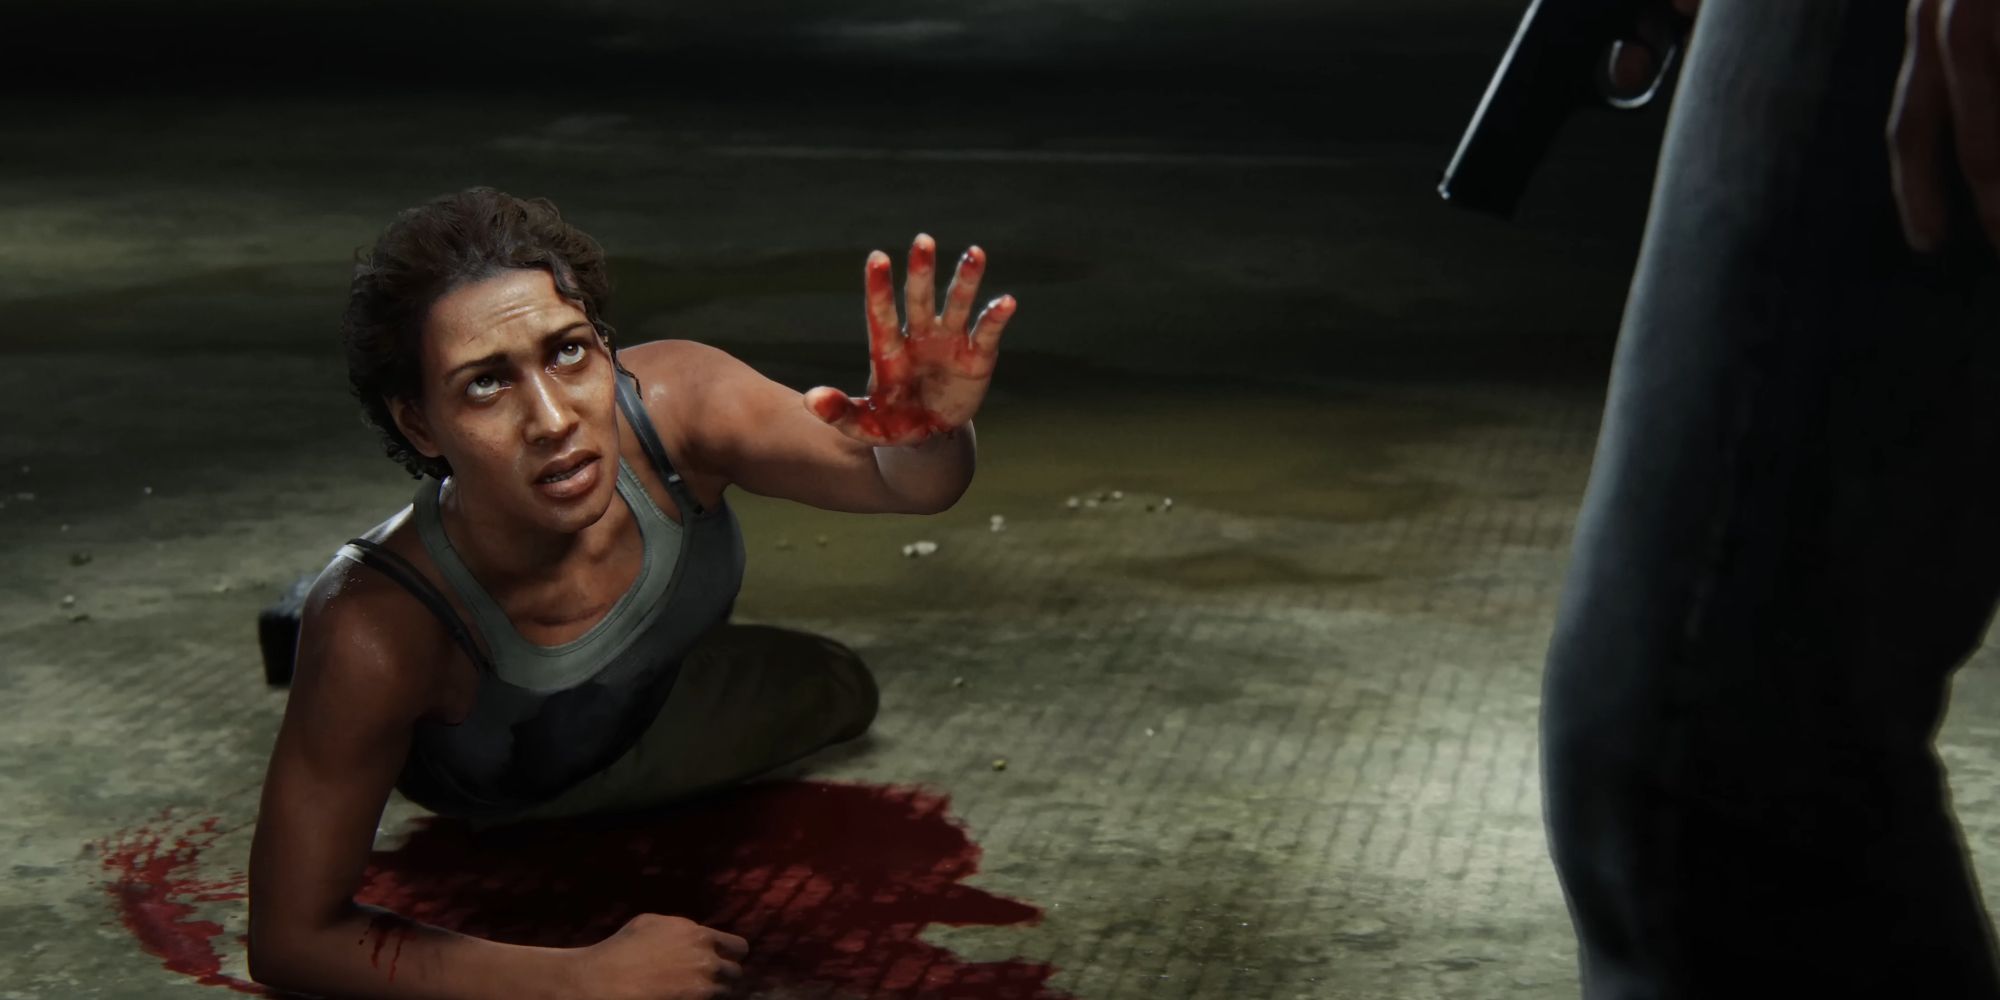 A woman laying on the ground in a pool of her own blood, holding up one hand a looking at someone whose leg can be seen on the edge of the frame. The second person is holding a pistol.